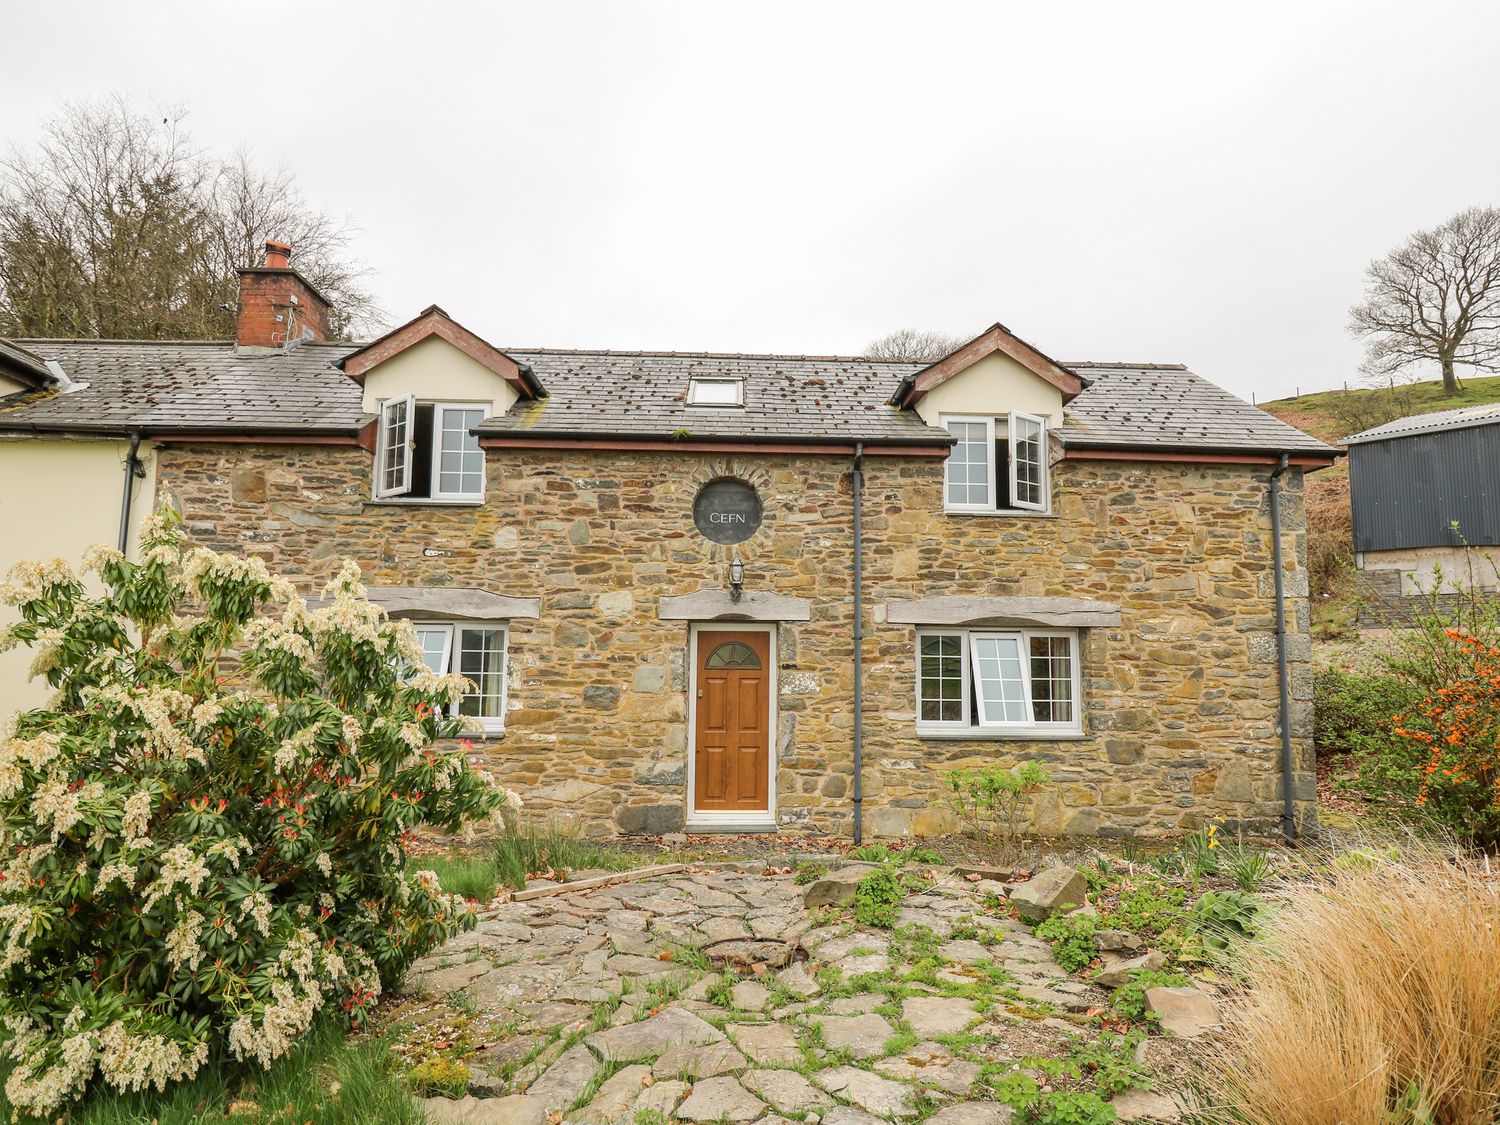 Cefn Cottage - Mid Wales - 945140 - photo 1